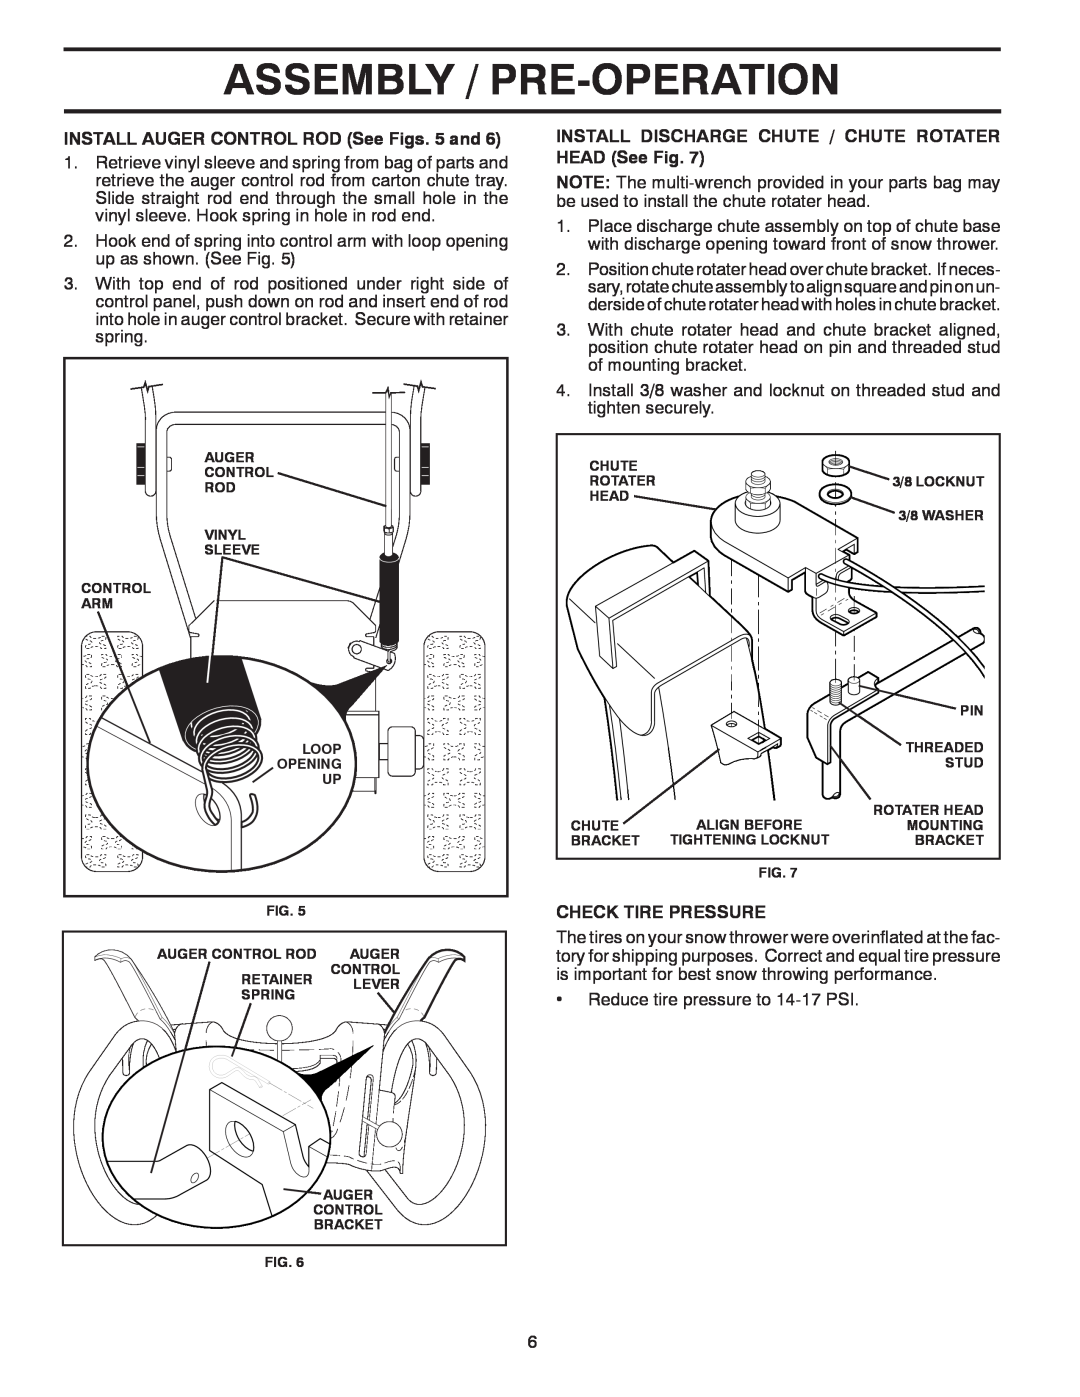 Poulan 435356, 96192003700 Assembly / Pre-Operation, INSTALL AUGER CONTROL ROD See Figs. 5 and, Check Tire Pressure 